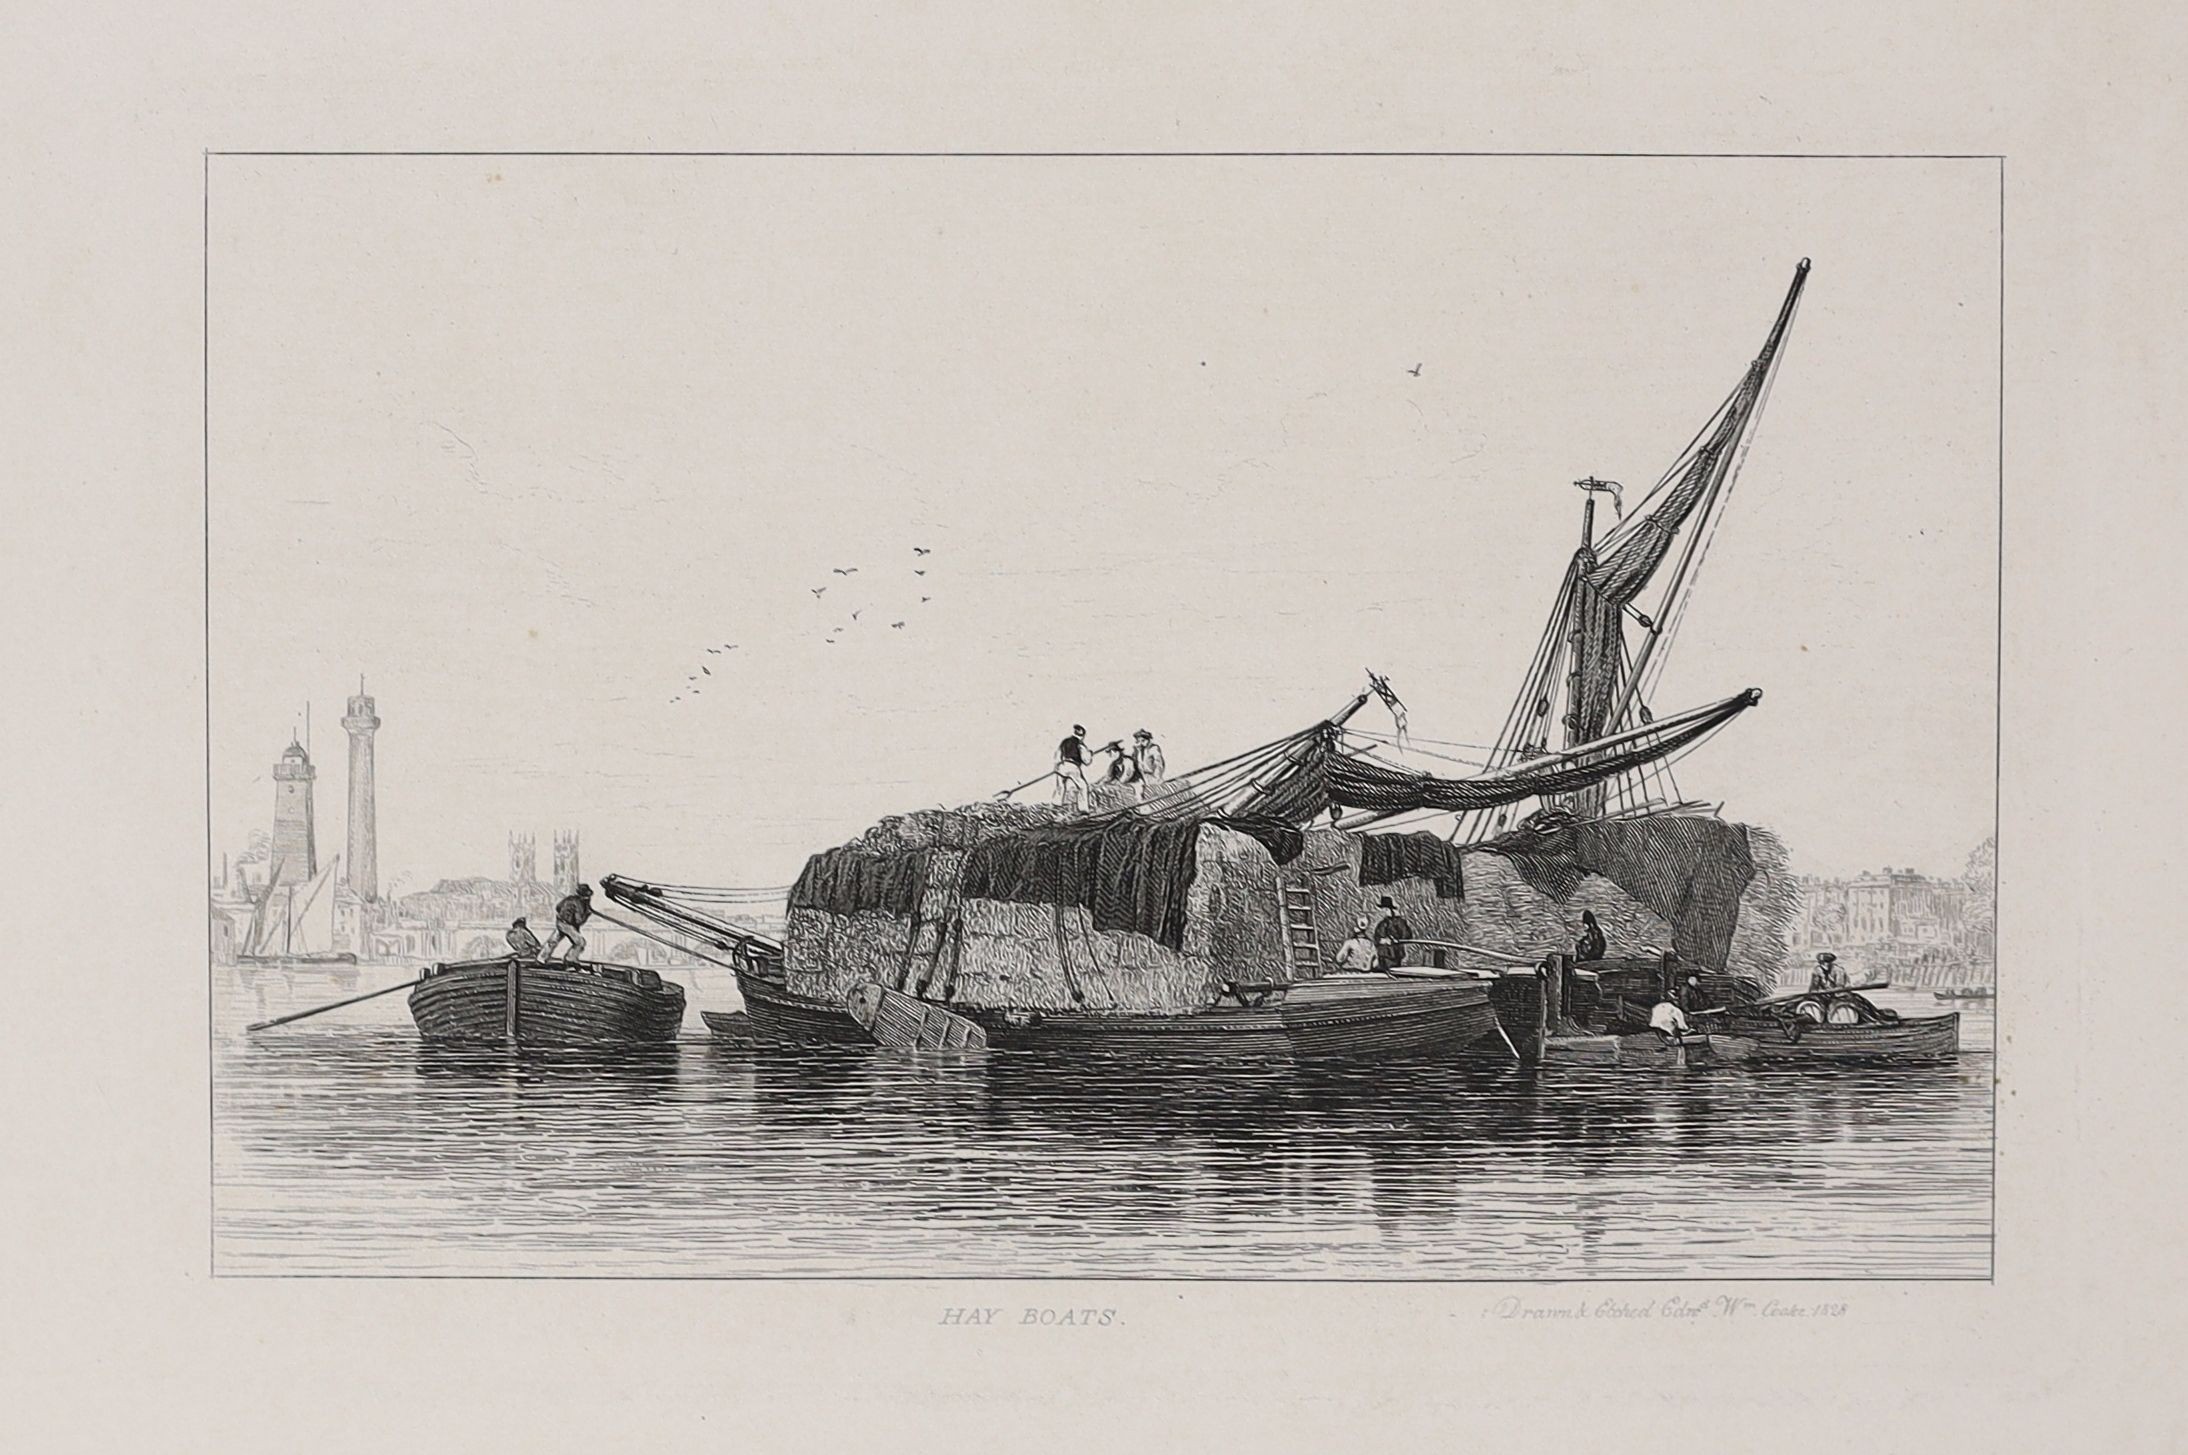 Cooke, Edward William - Sixty Five Plates of Shipping and Craft, 4to, original cloth, with 65 titled, engraved plates, London, 1829, and Stanfield, Clarkson - Stanfield’s Coast Scenery. A Series of Views in the British C